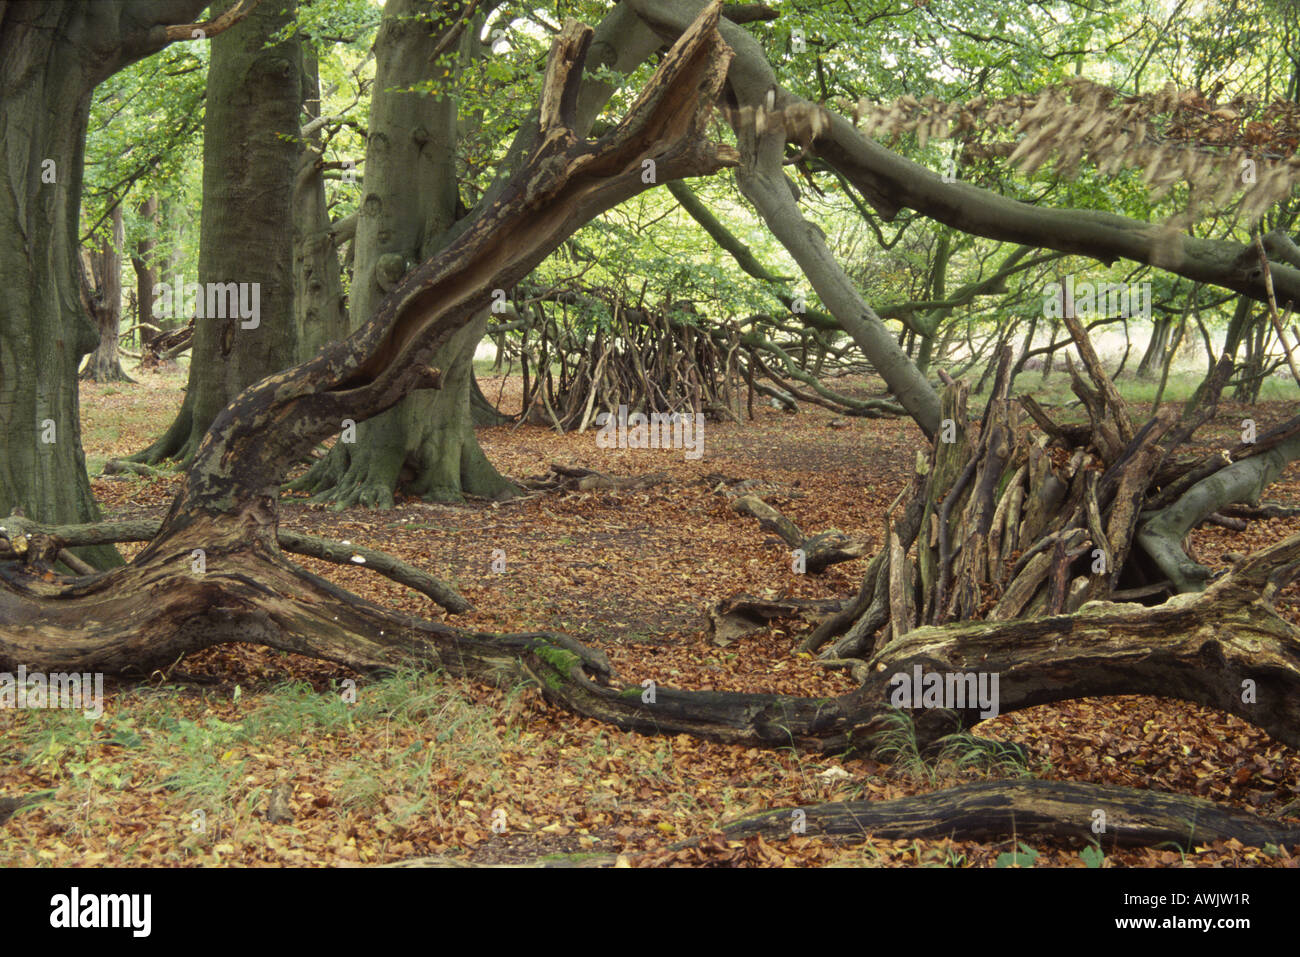 Triangle of Live Fallen Beech Branches Frame Deadwood Habitat Piles in Brown Autumn Woodland Wytham Berkshire England UK 2005 Stock Photo